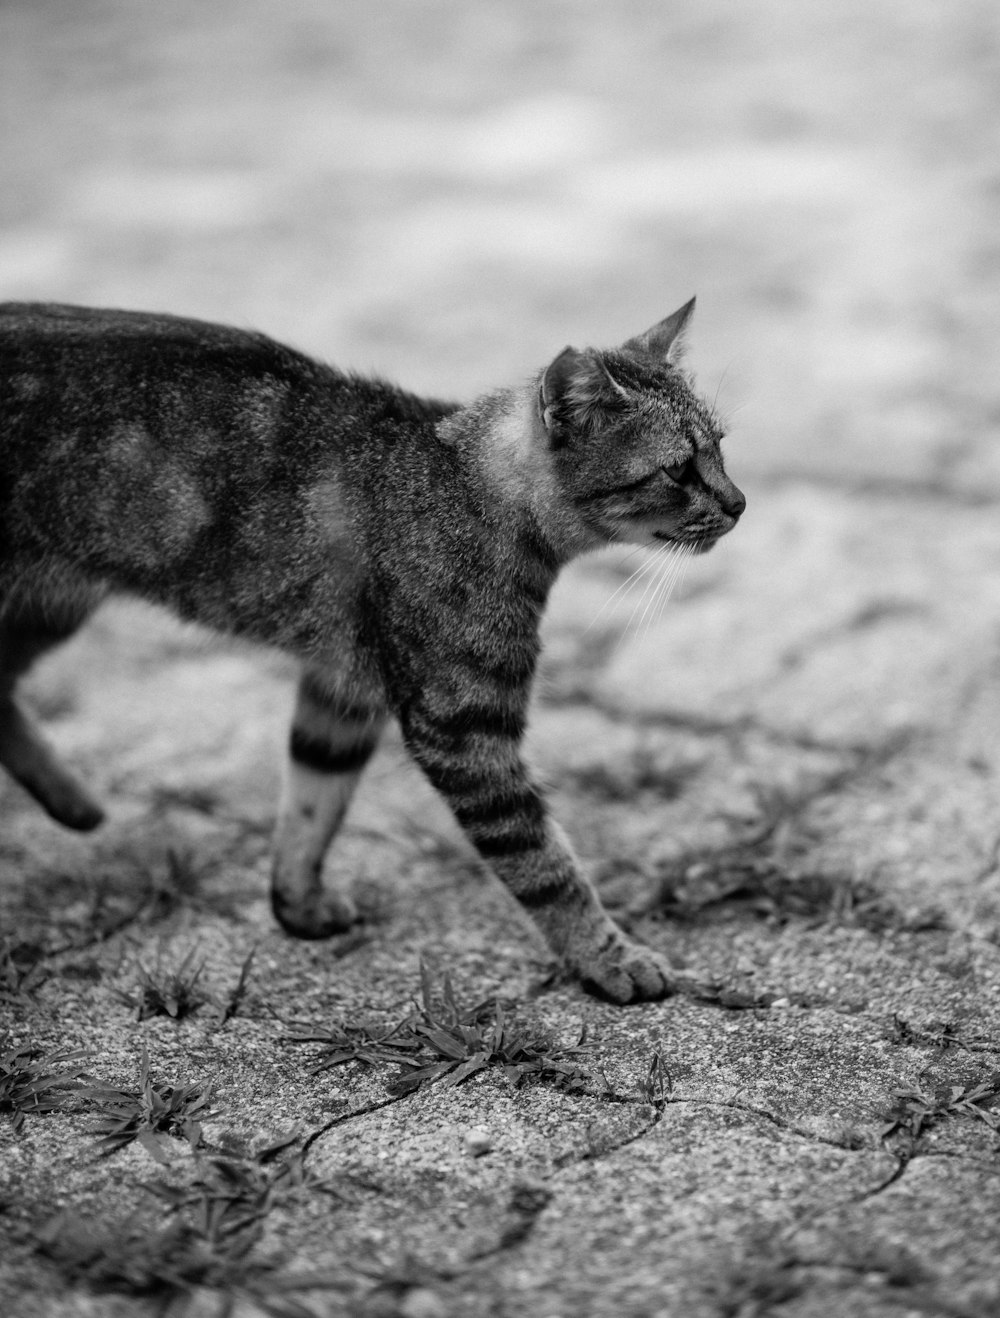 grayscale photo of cat walking